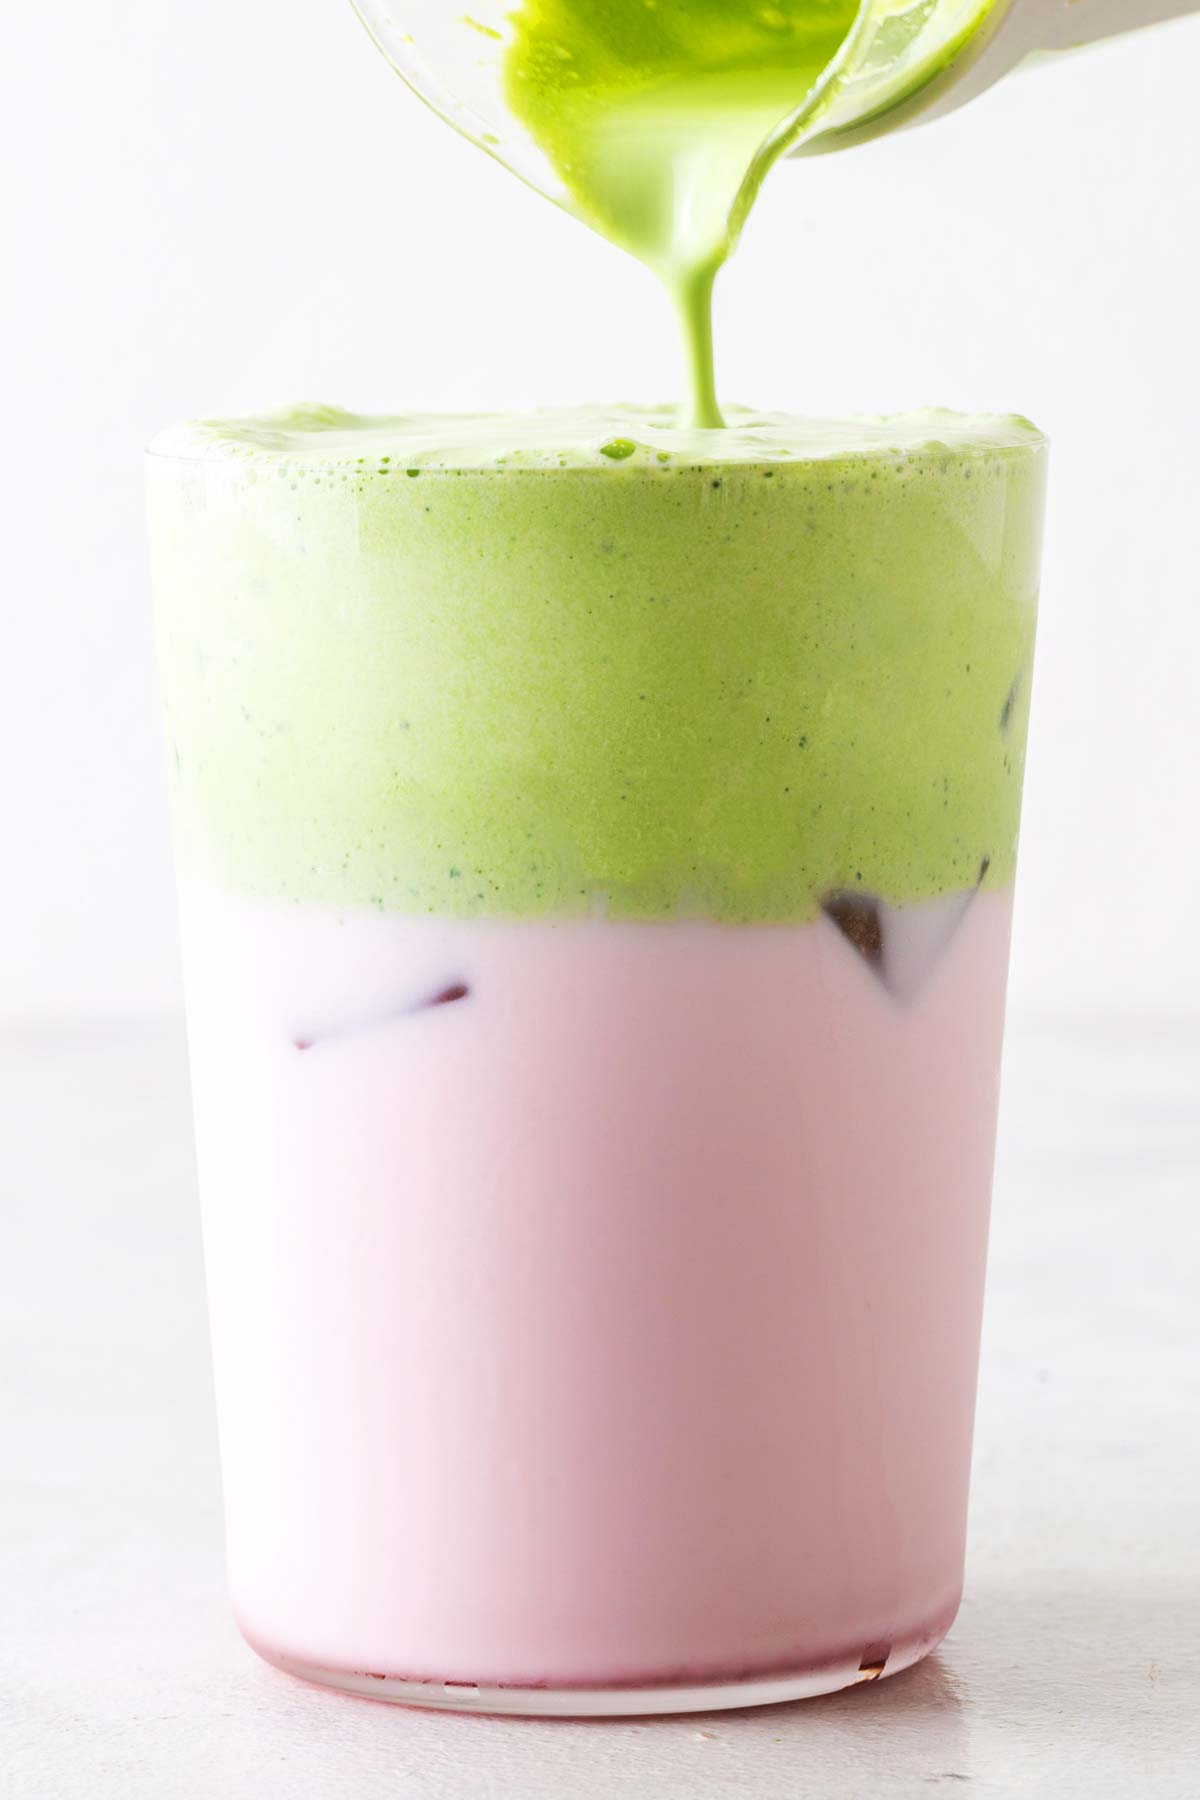 Matcha cold foam being poured over a pink iced drink in a clear glass.